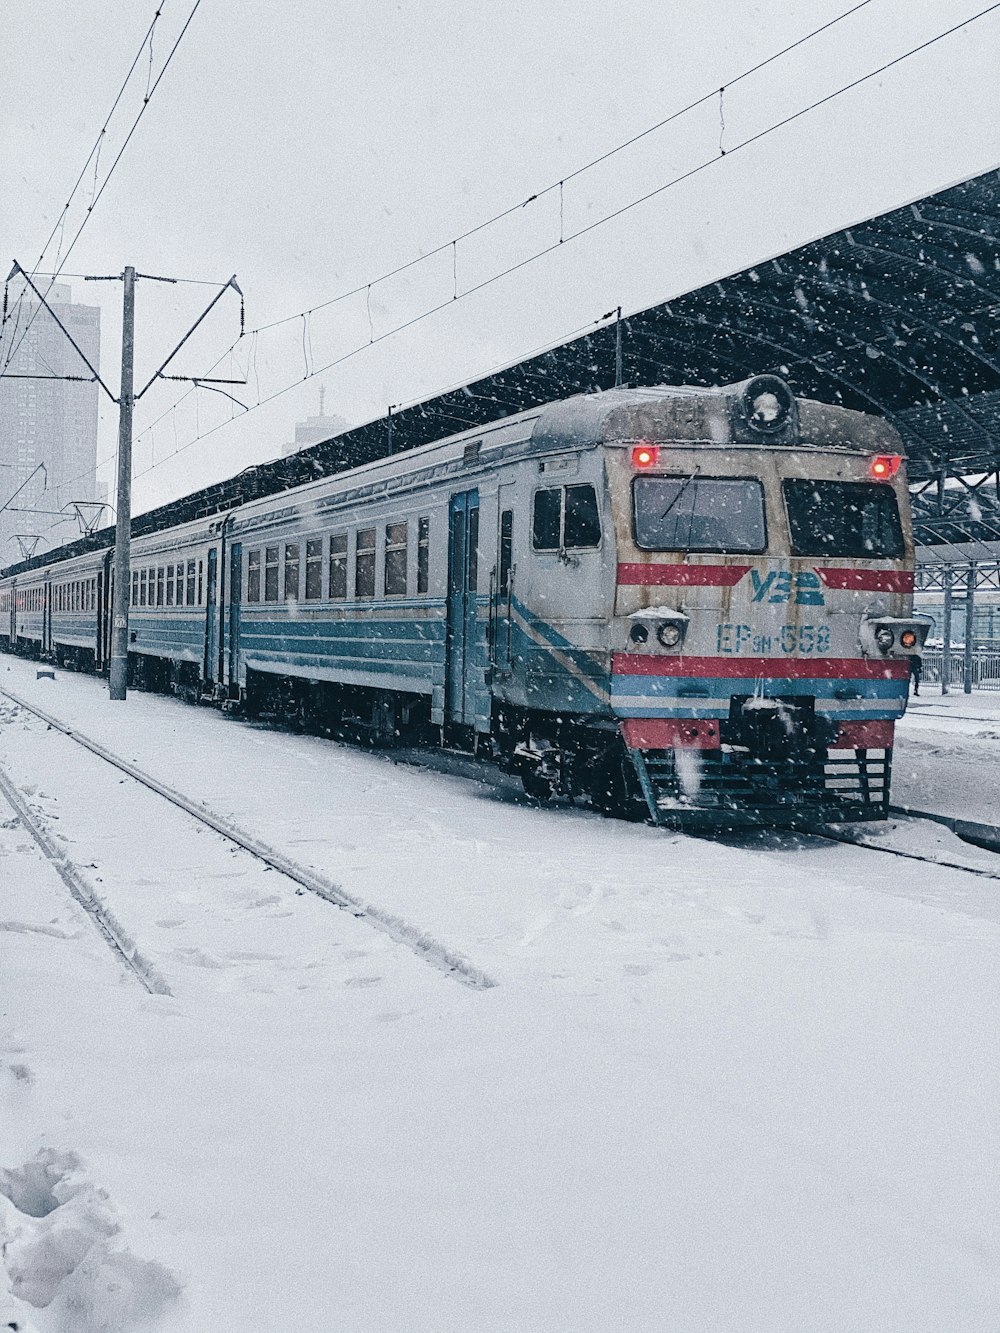 red and black train on snow covered ground during daytime